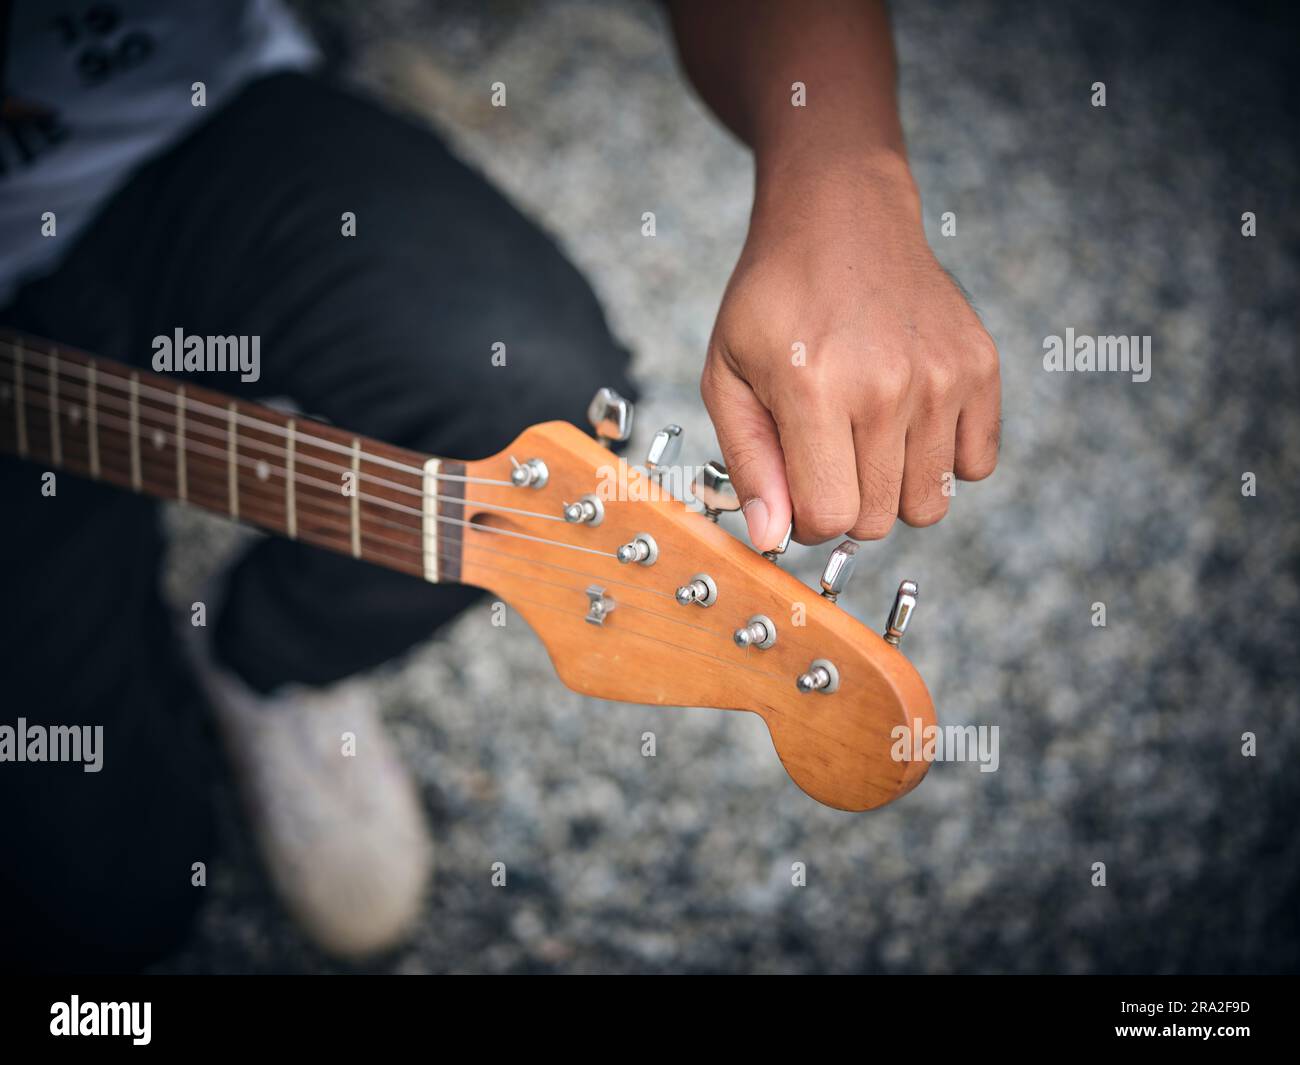 THE man indoors tuning guitar, front view and copy space. Stock Photo